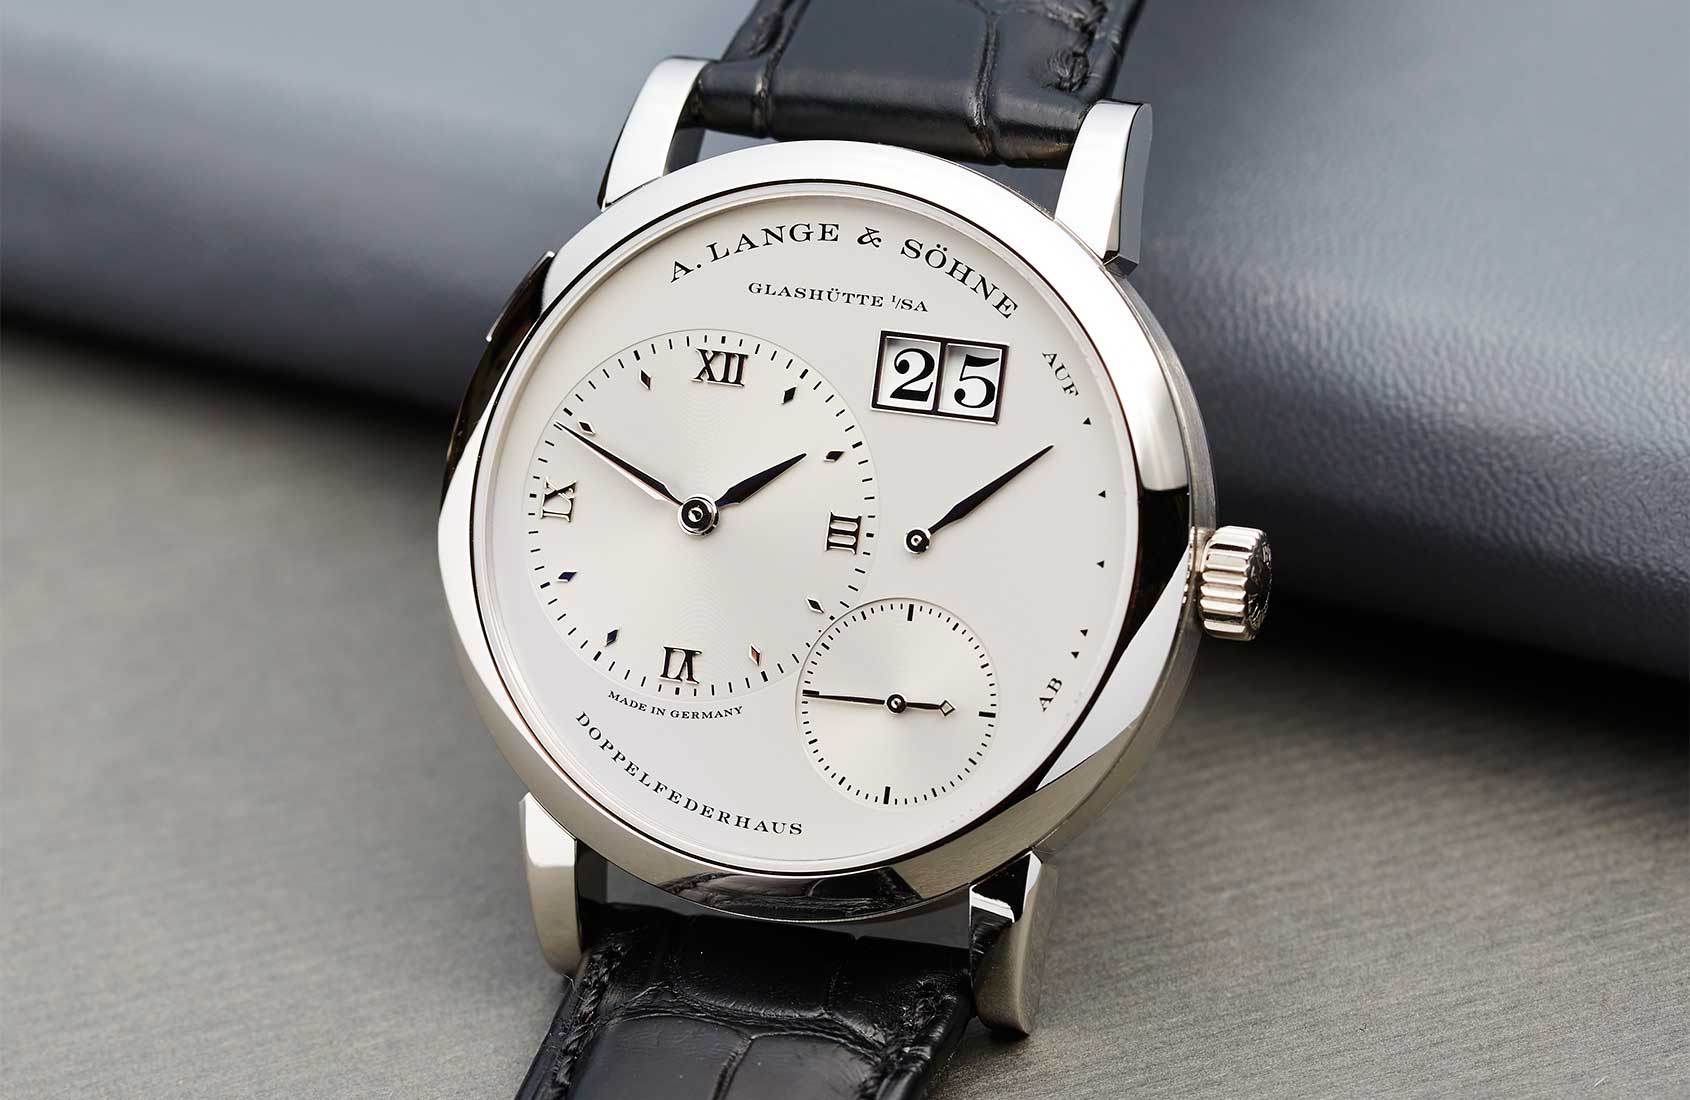 HOLIDAY BUYING GUIDE: The A. Lange & Söhne Lange 1